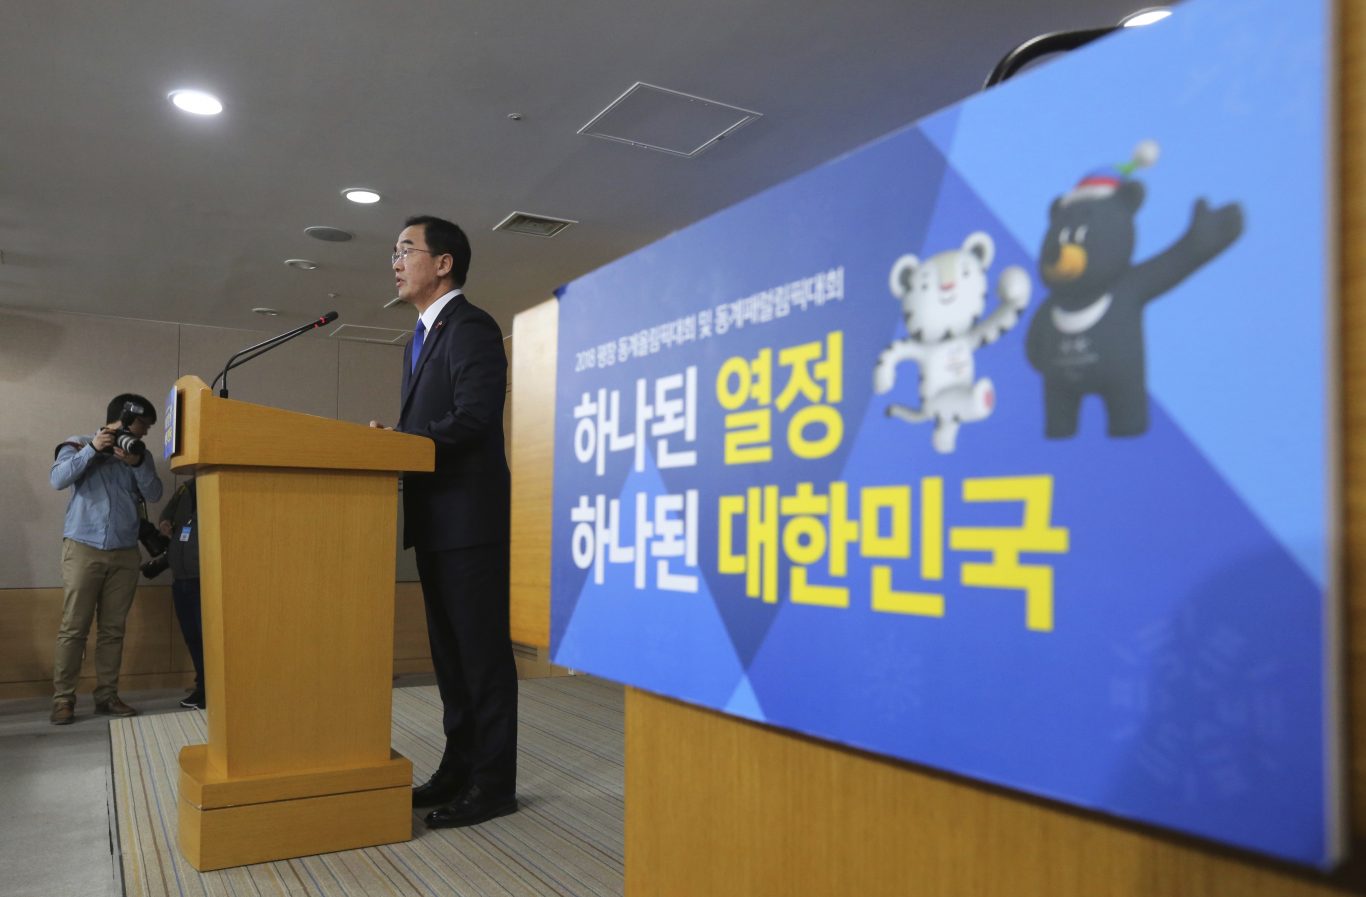 South Korean Unification Minster Cho Myoung-gyon during a press conference in Seoul (Ahn Young-joon/AP)